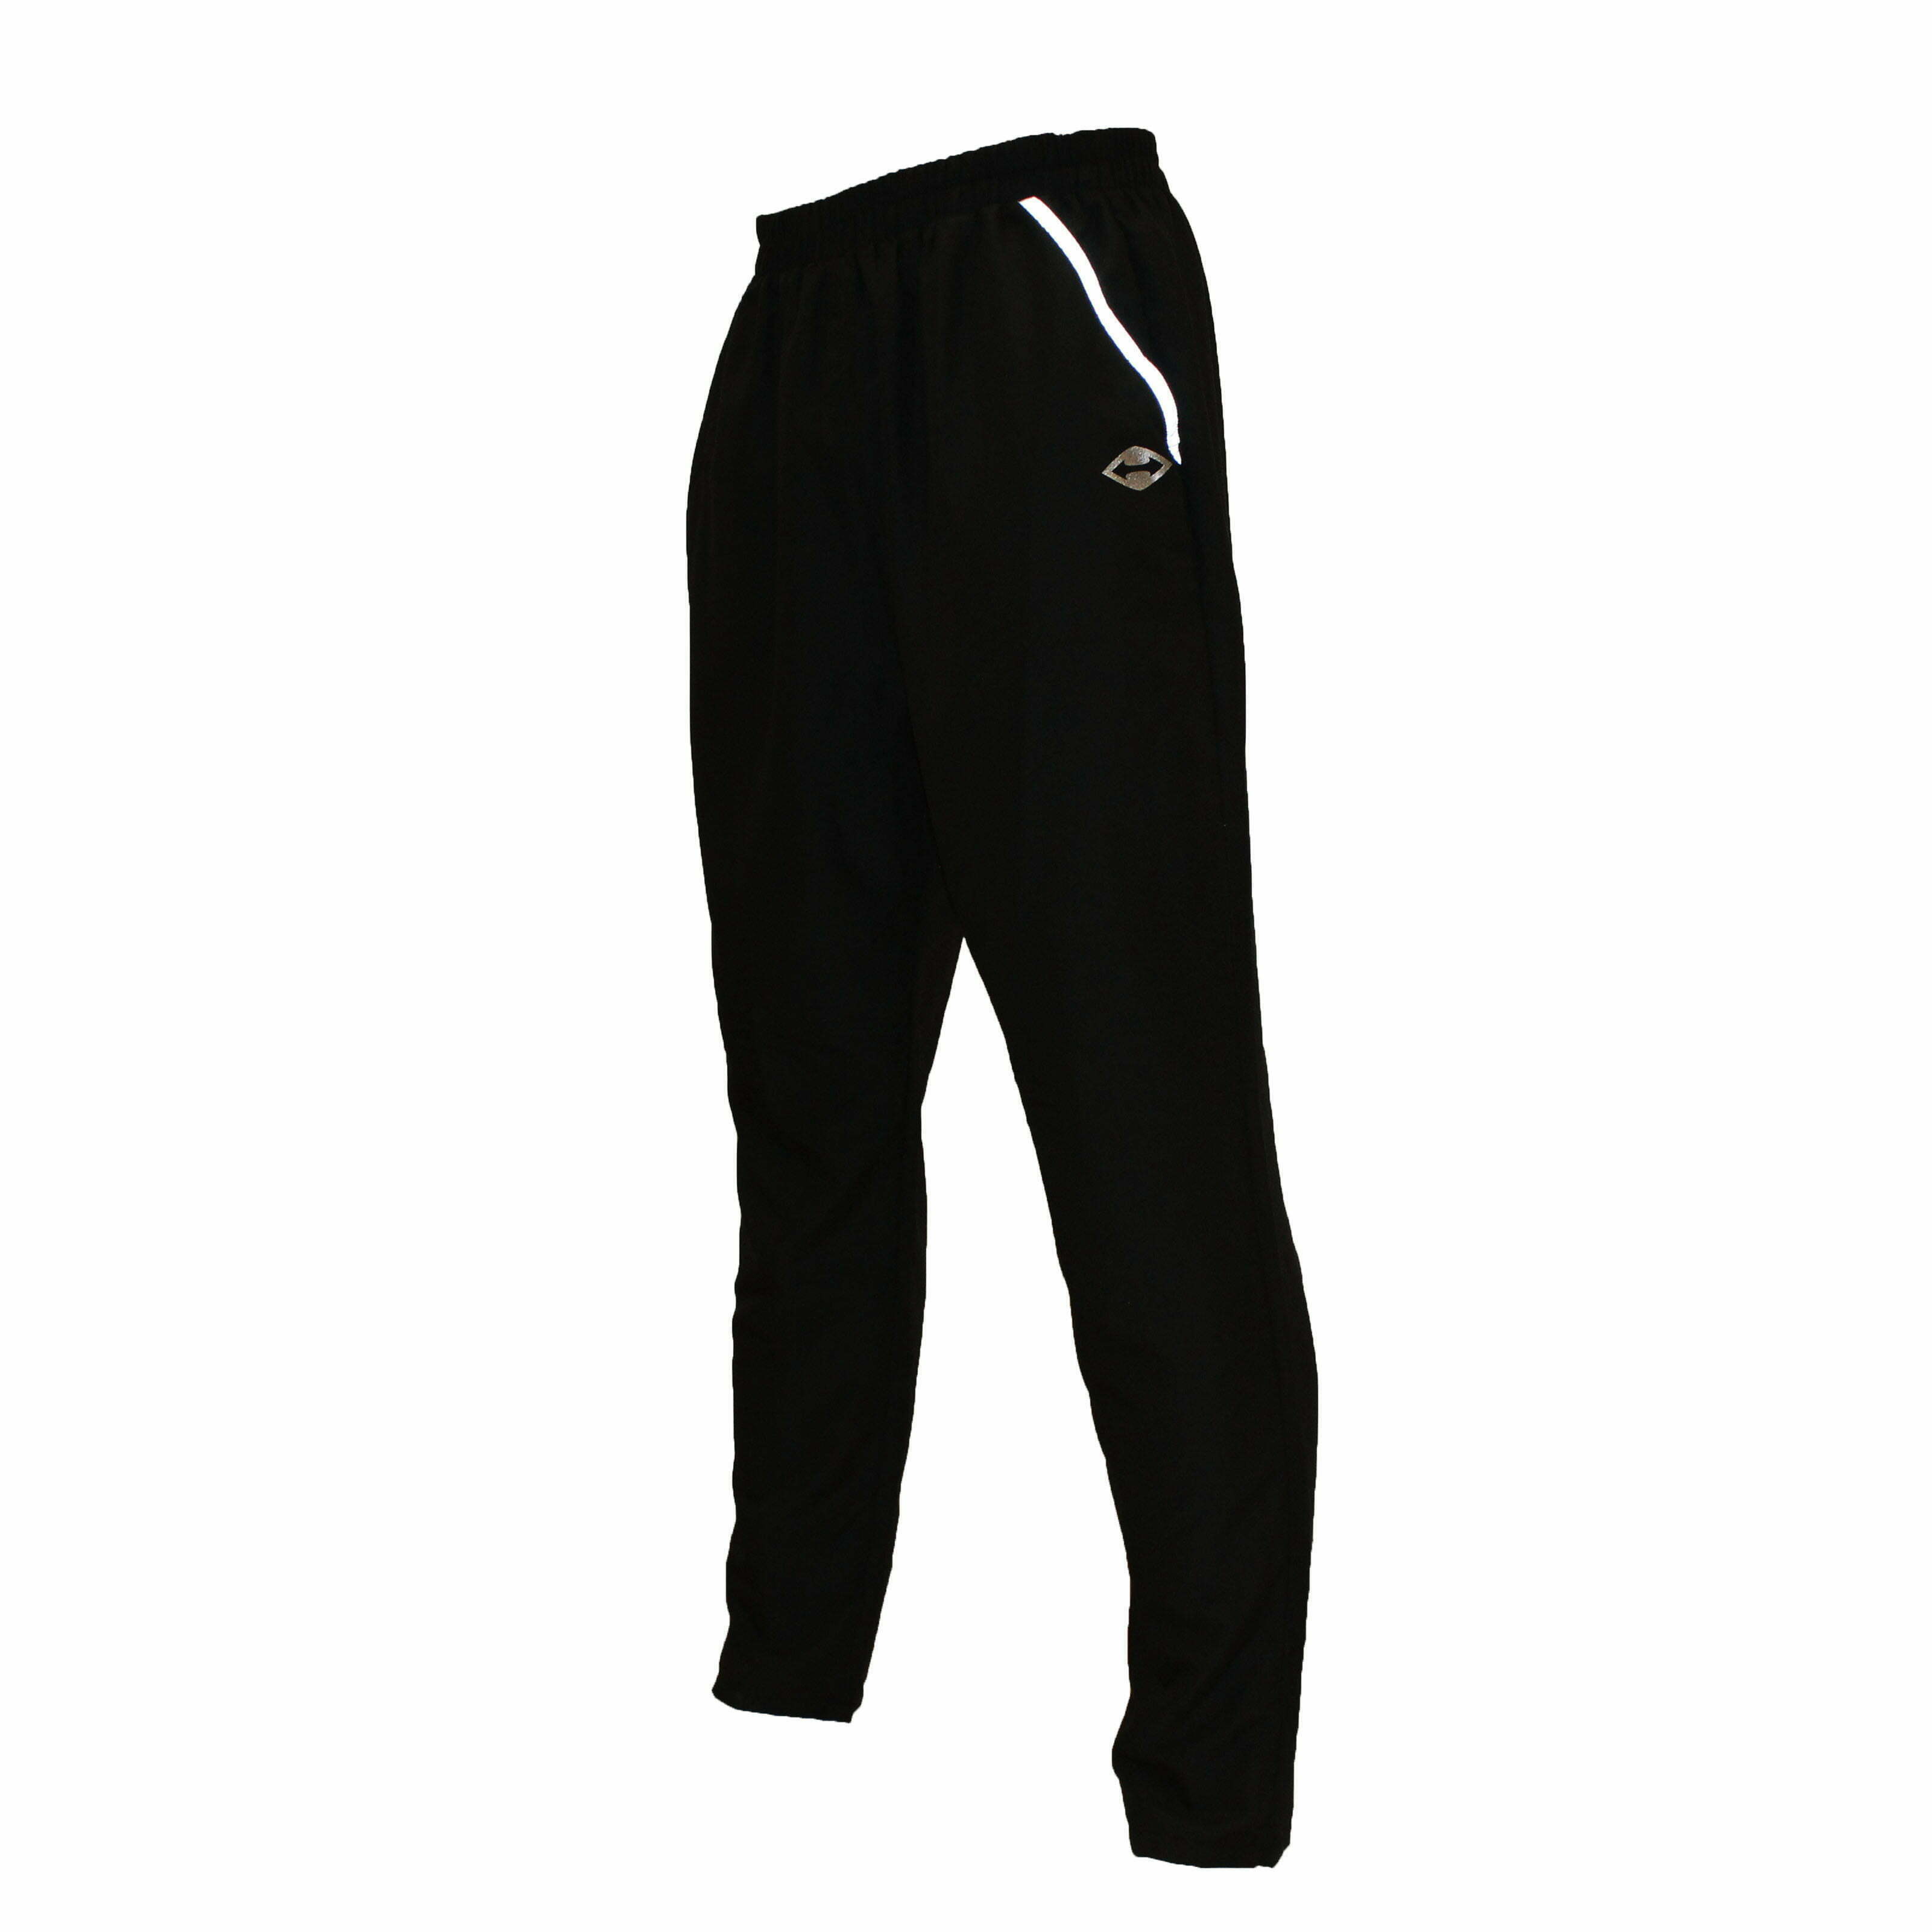 Track Pants Archives - Sports & Games